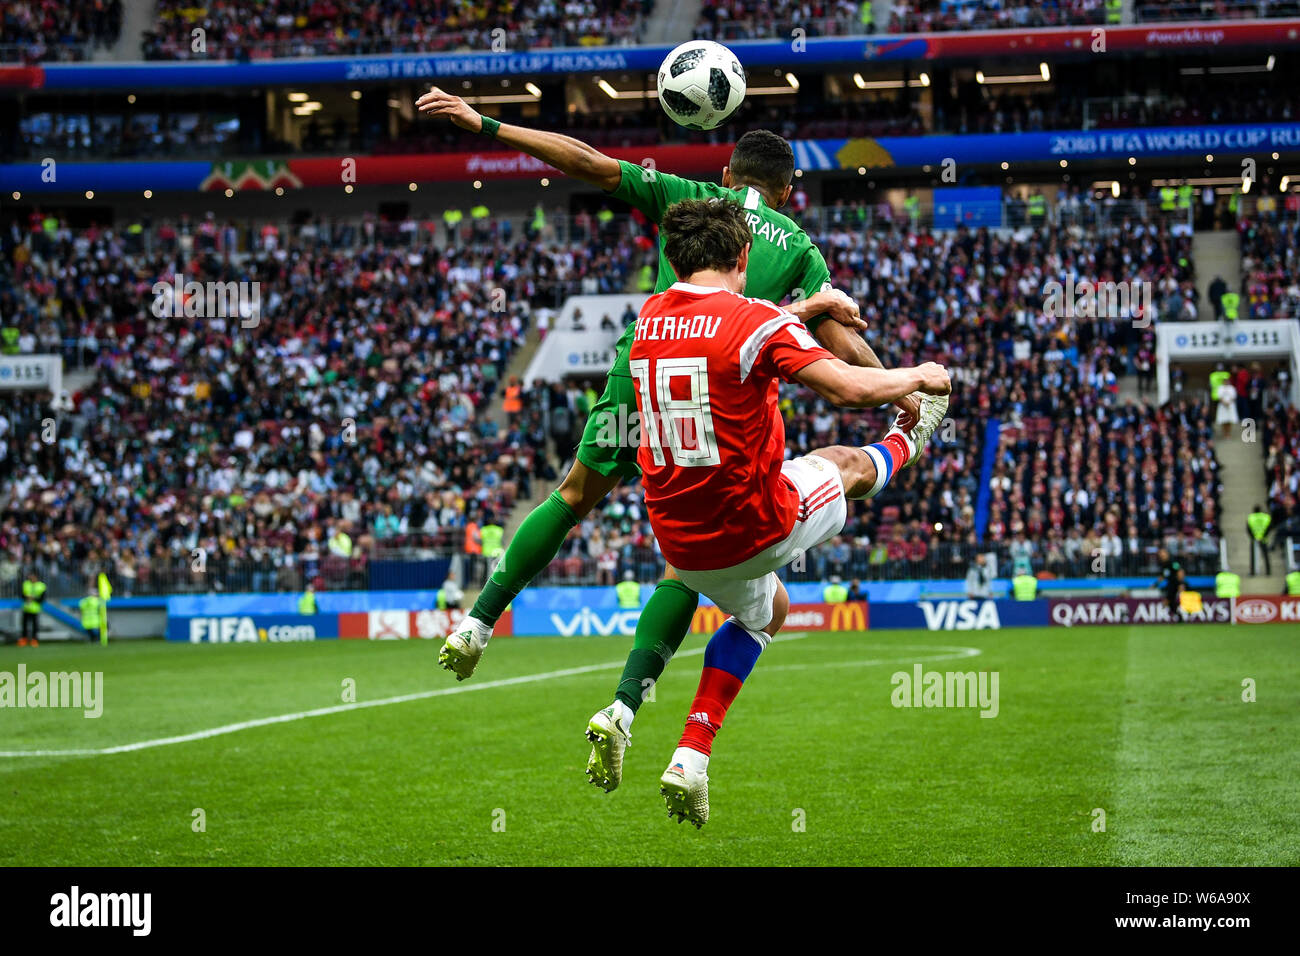 Yuri Zhirkov of Russia, front, heads the ball against a player of Saudi Arabia in their Group A match during the 2018 FIFA World Cup in Moscow, Russia Stock Photo